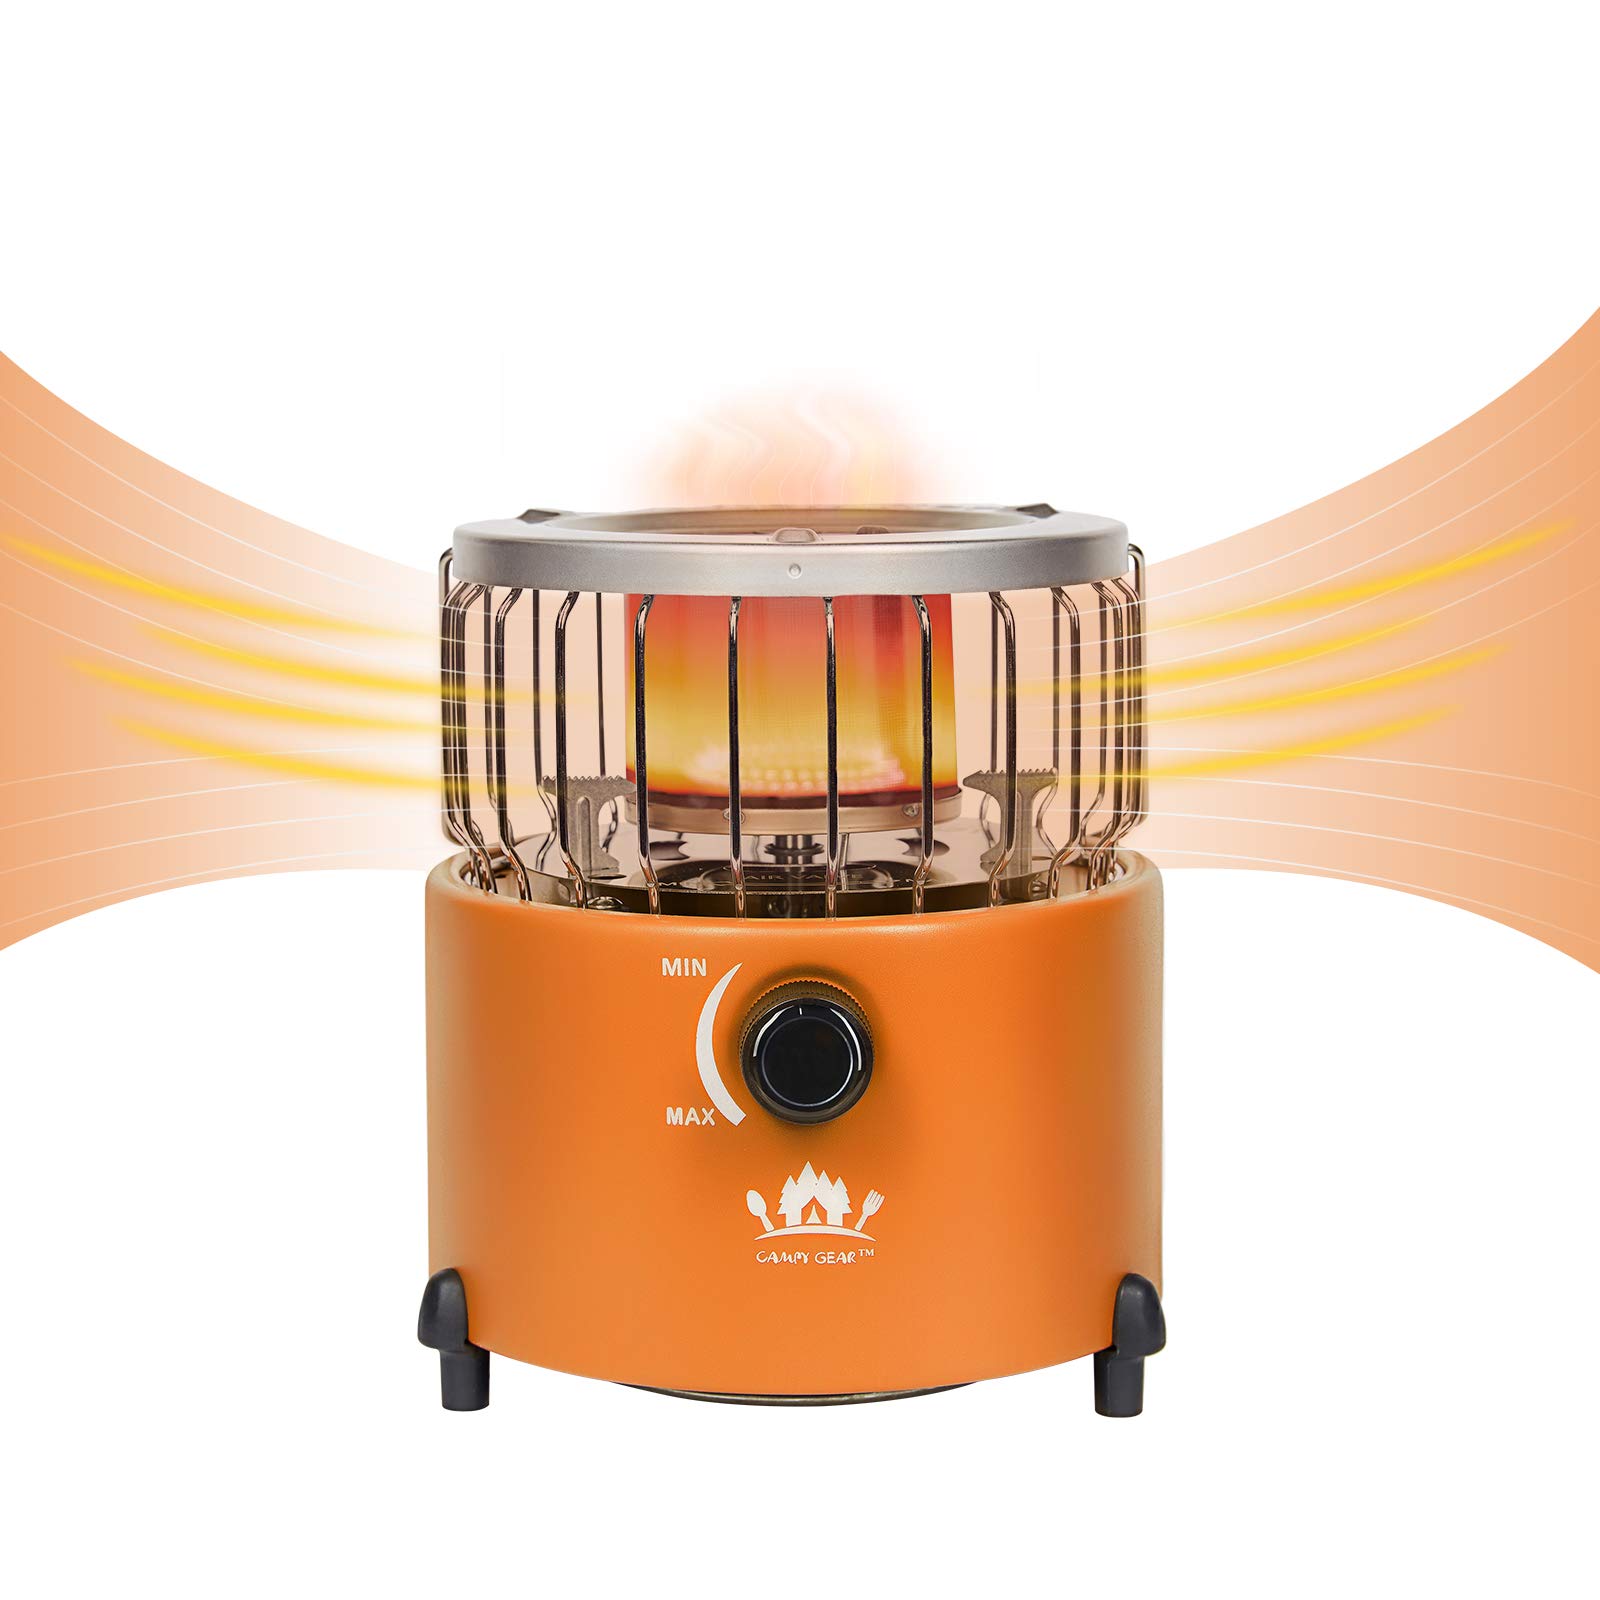 The Best Portable Propane Heater And Stove Of 2023